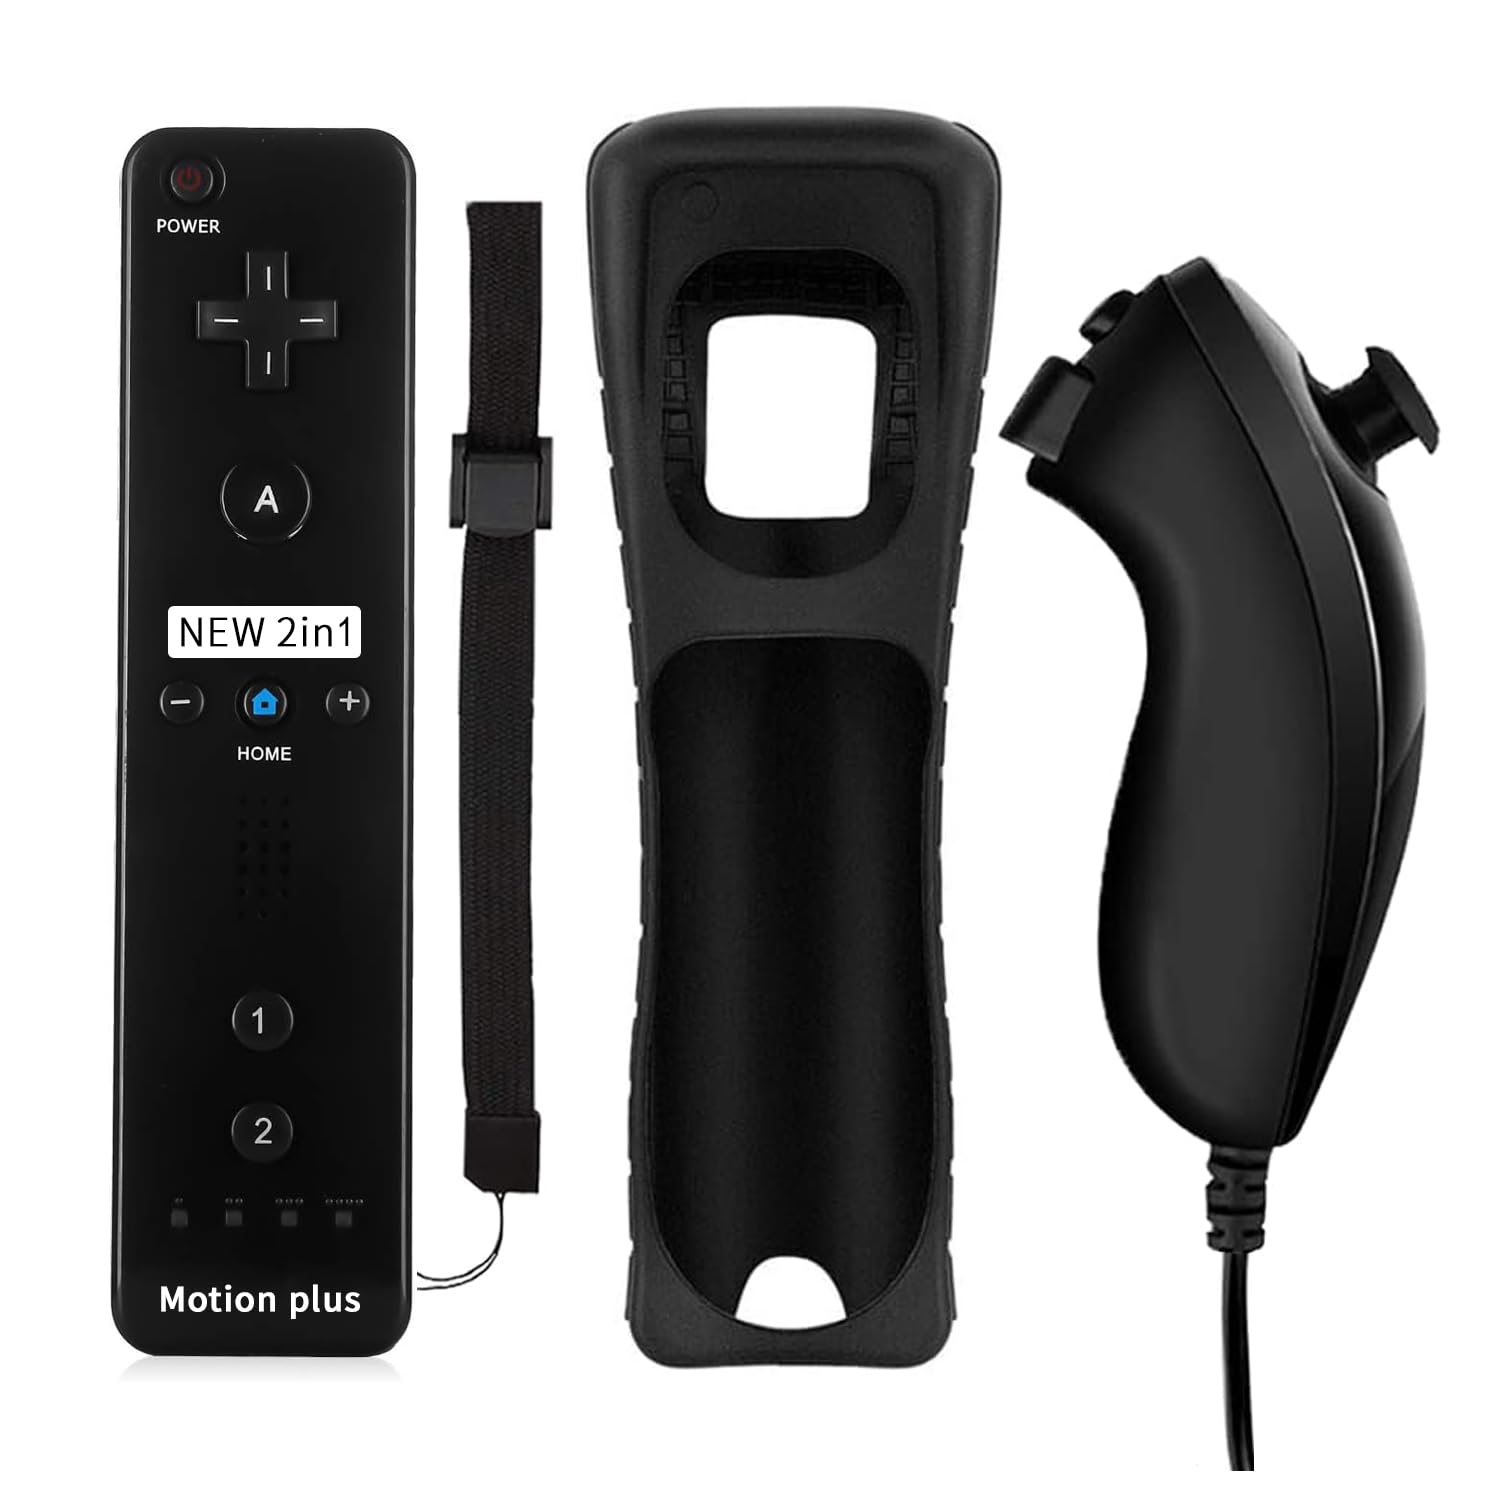 thinkstar Wii Remote Controller And Nunchuck Controller With Silicone Case And Wrist Strap-Fine Black